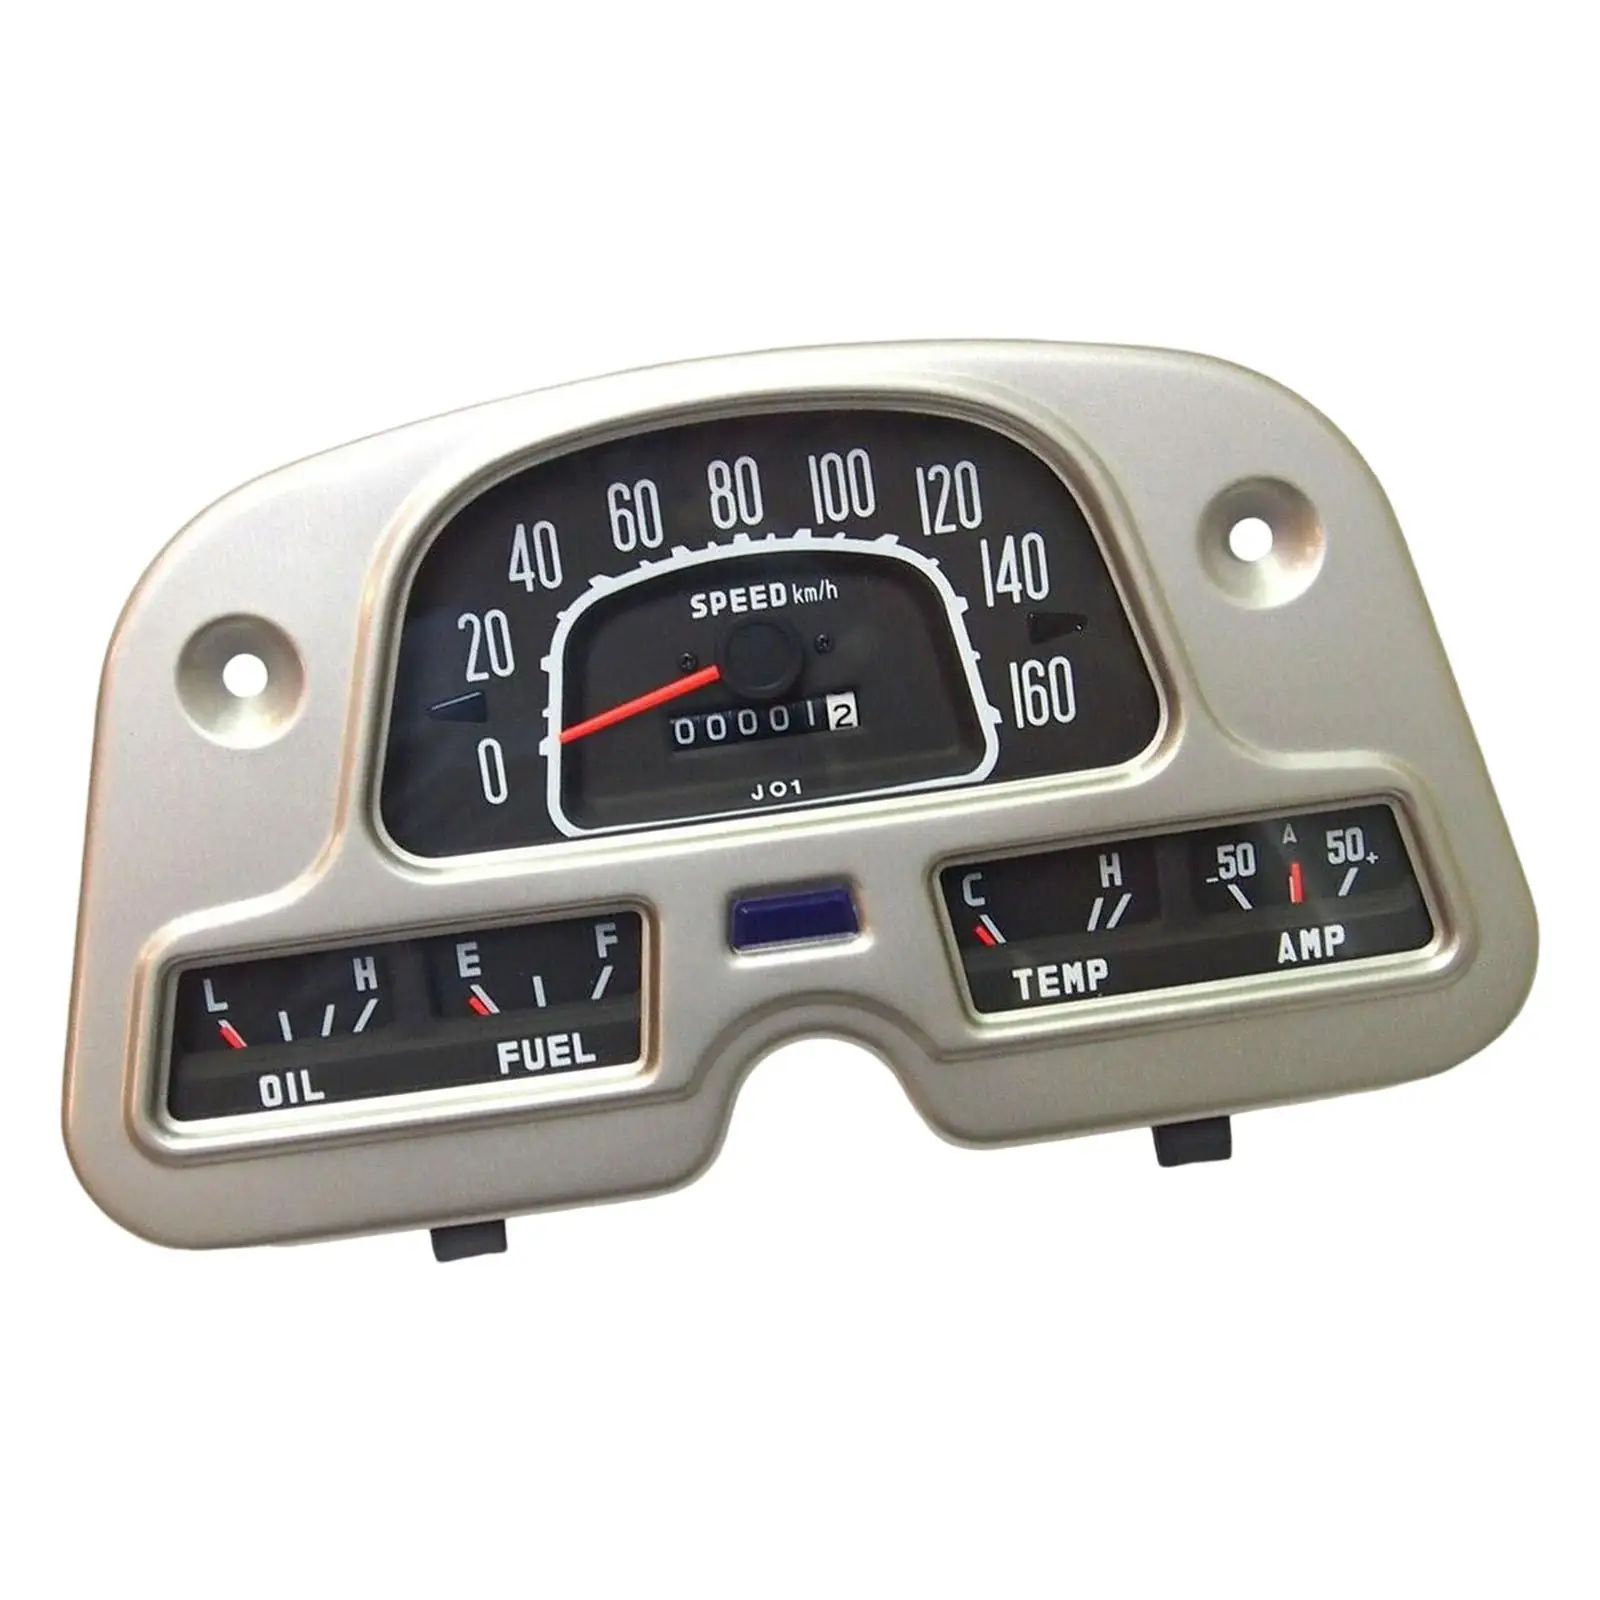 83100-60180 / Speedometer for Bj40 Replacement /Automotive Accessory